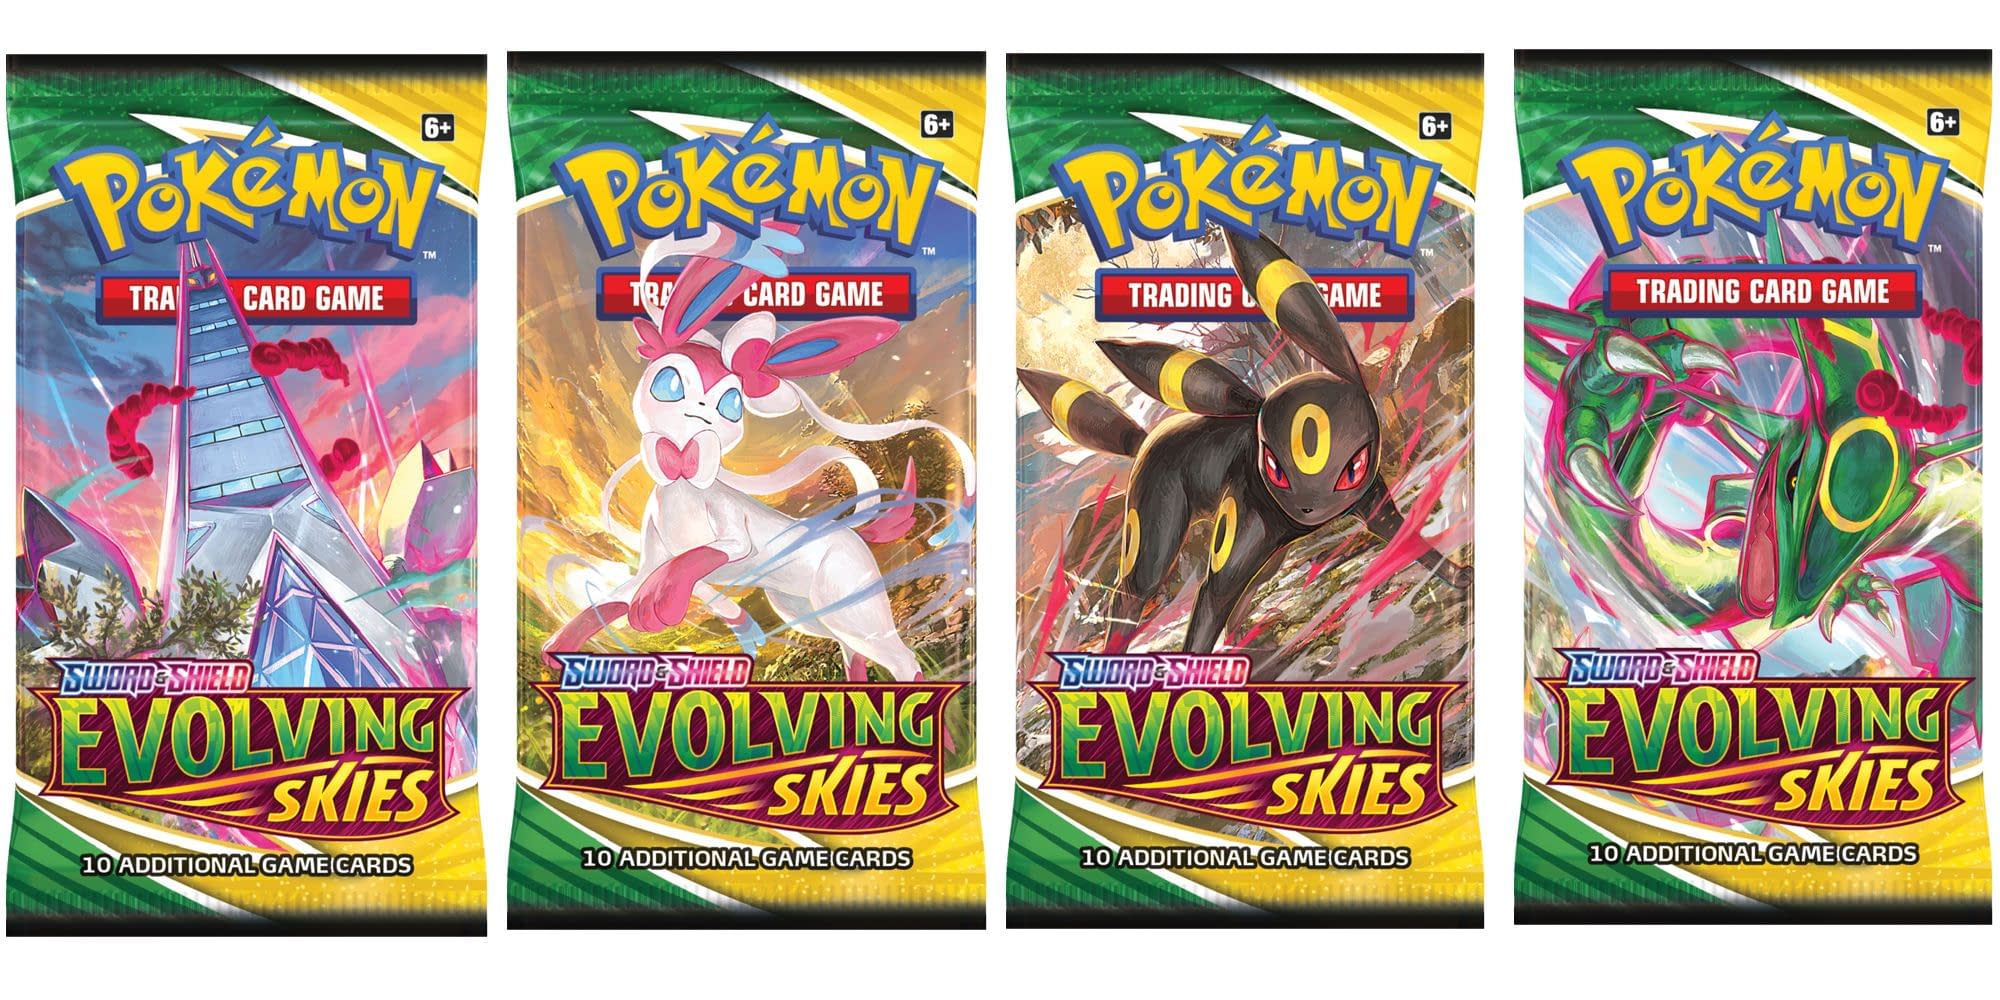 You are currently viewing The Best Places to Pre-Order the New Evolving Skies Pokemon TCG Set